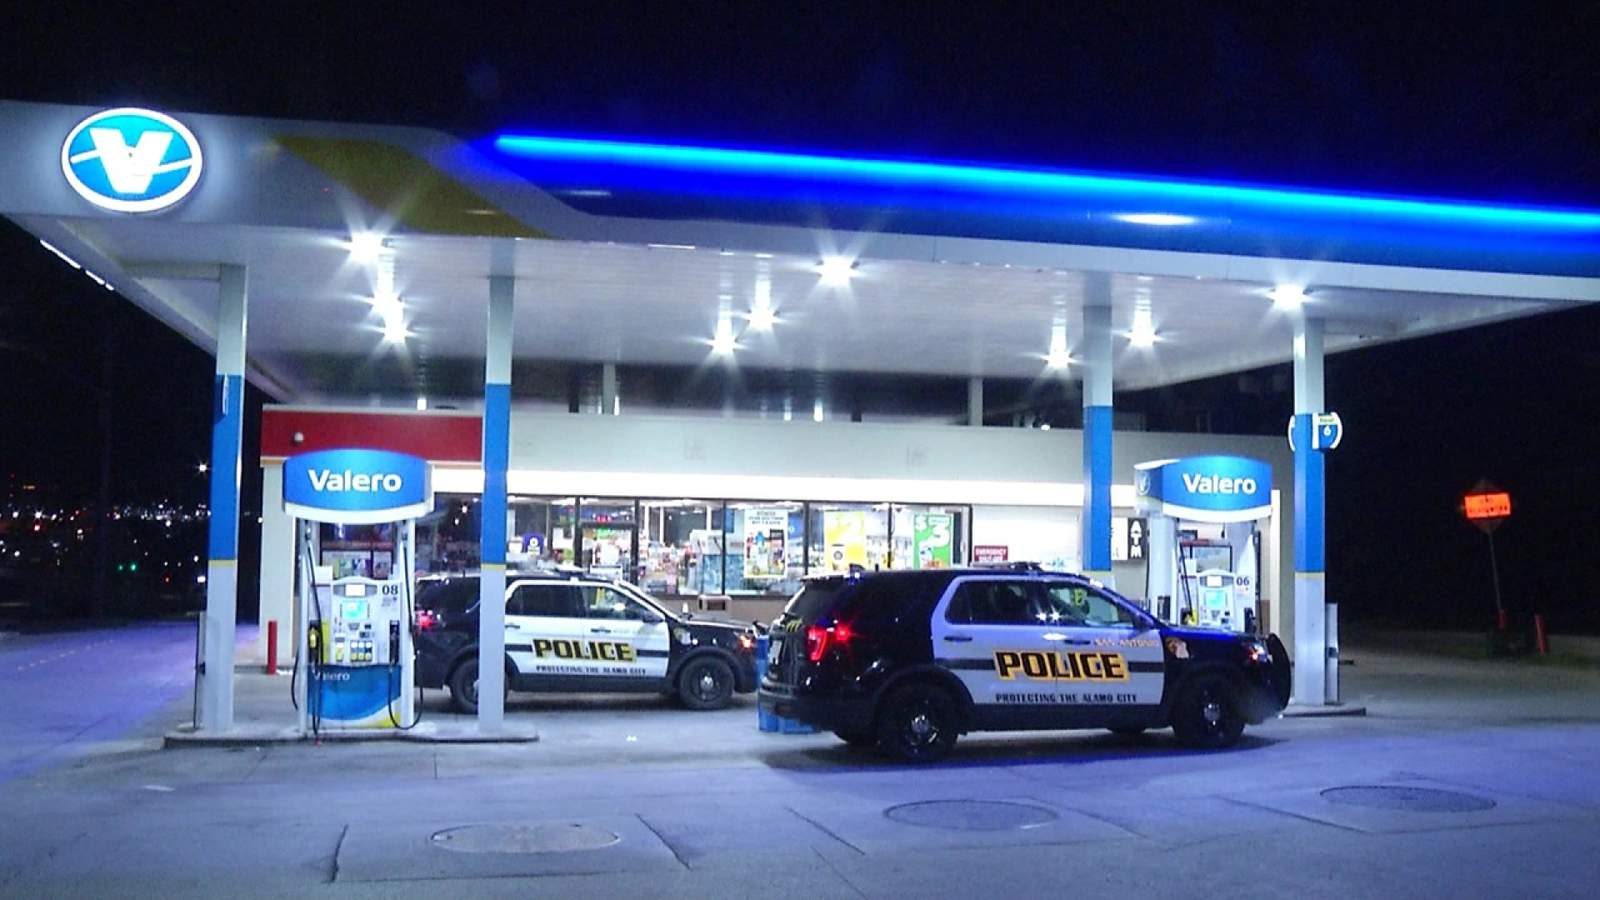 Robber gets away with cash after threatening convenience store clerk, police say